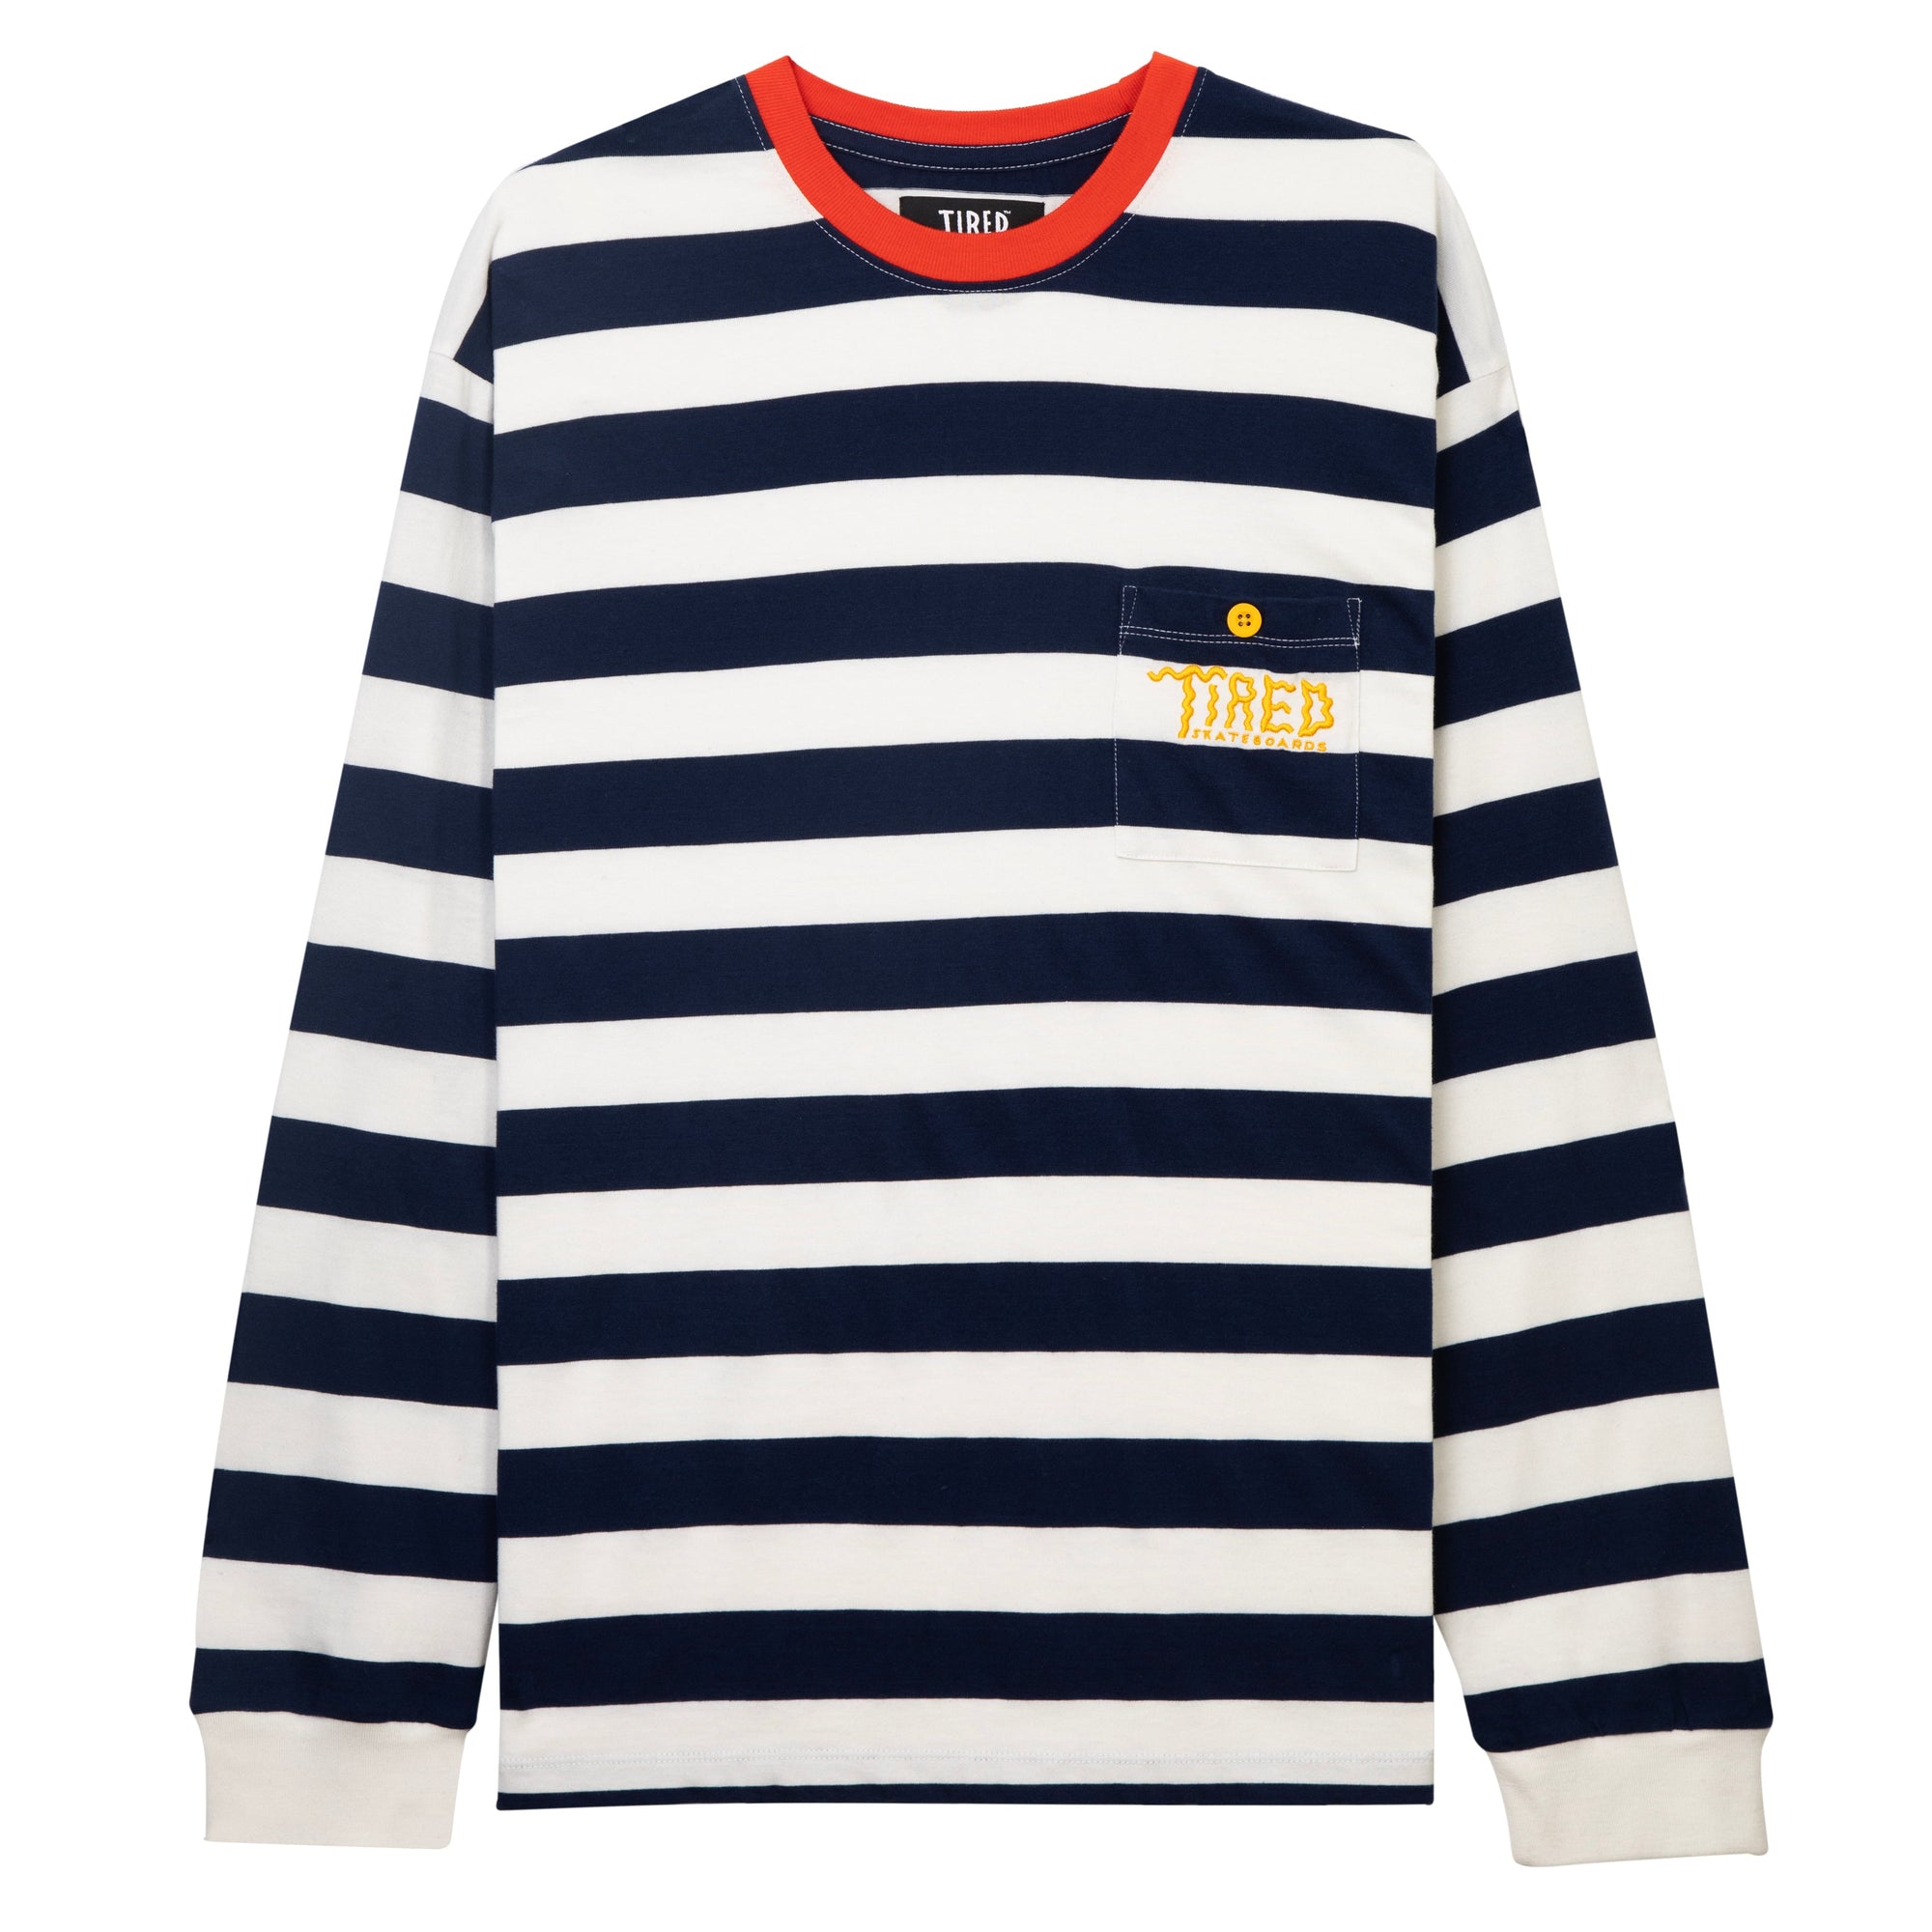 Tired Squiggly Logo Striped Pocket LS - Red / Navy